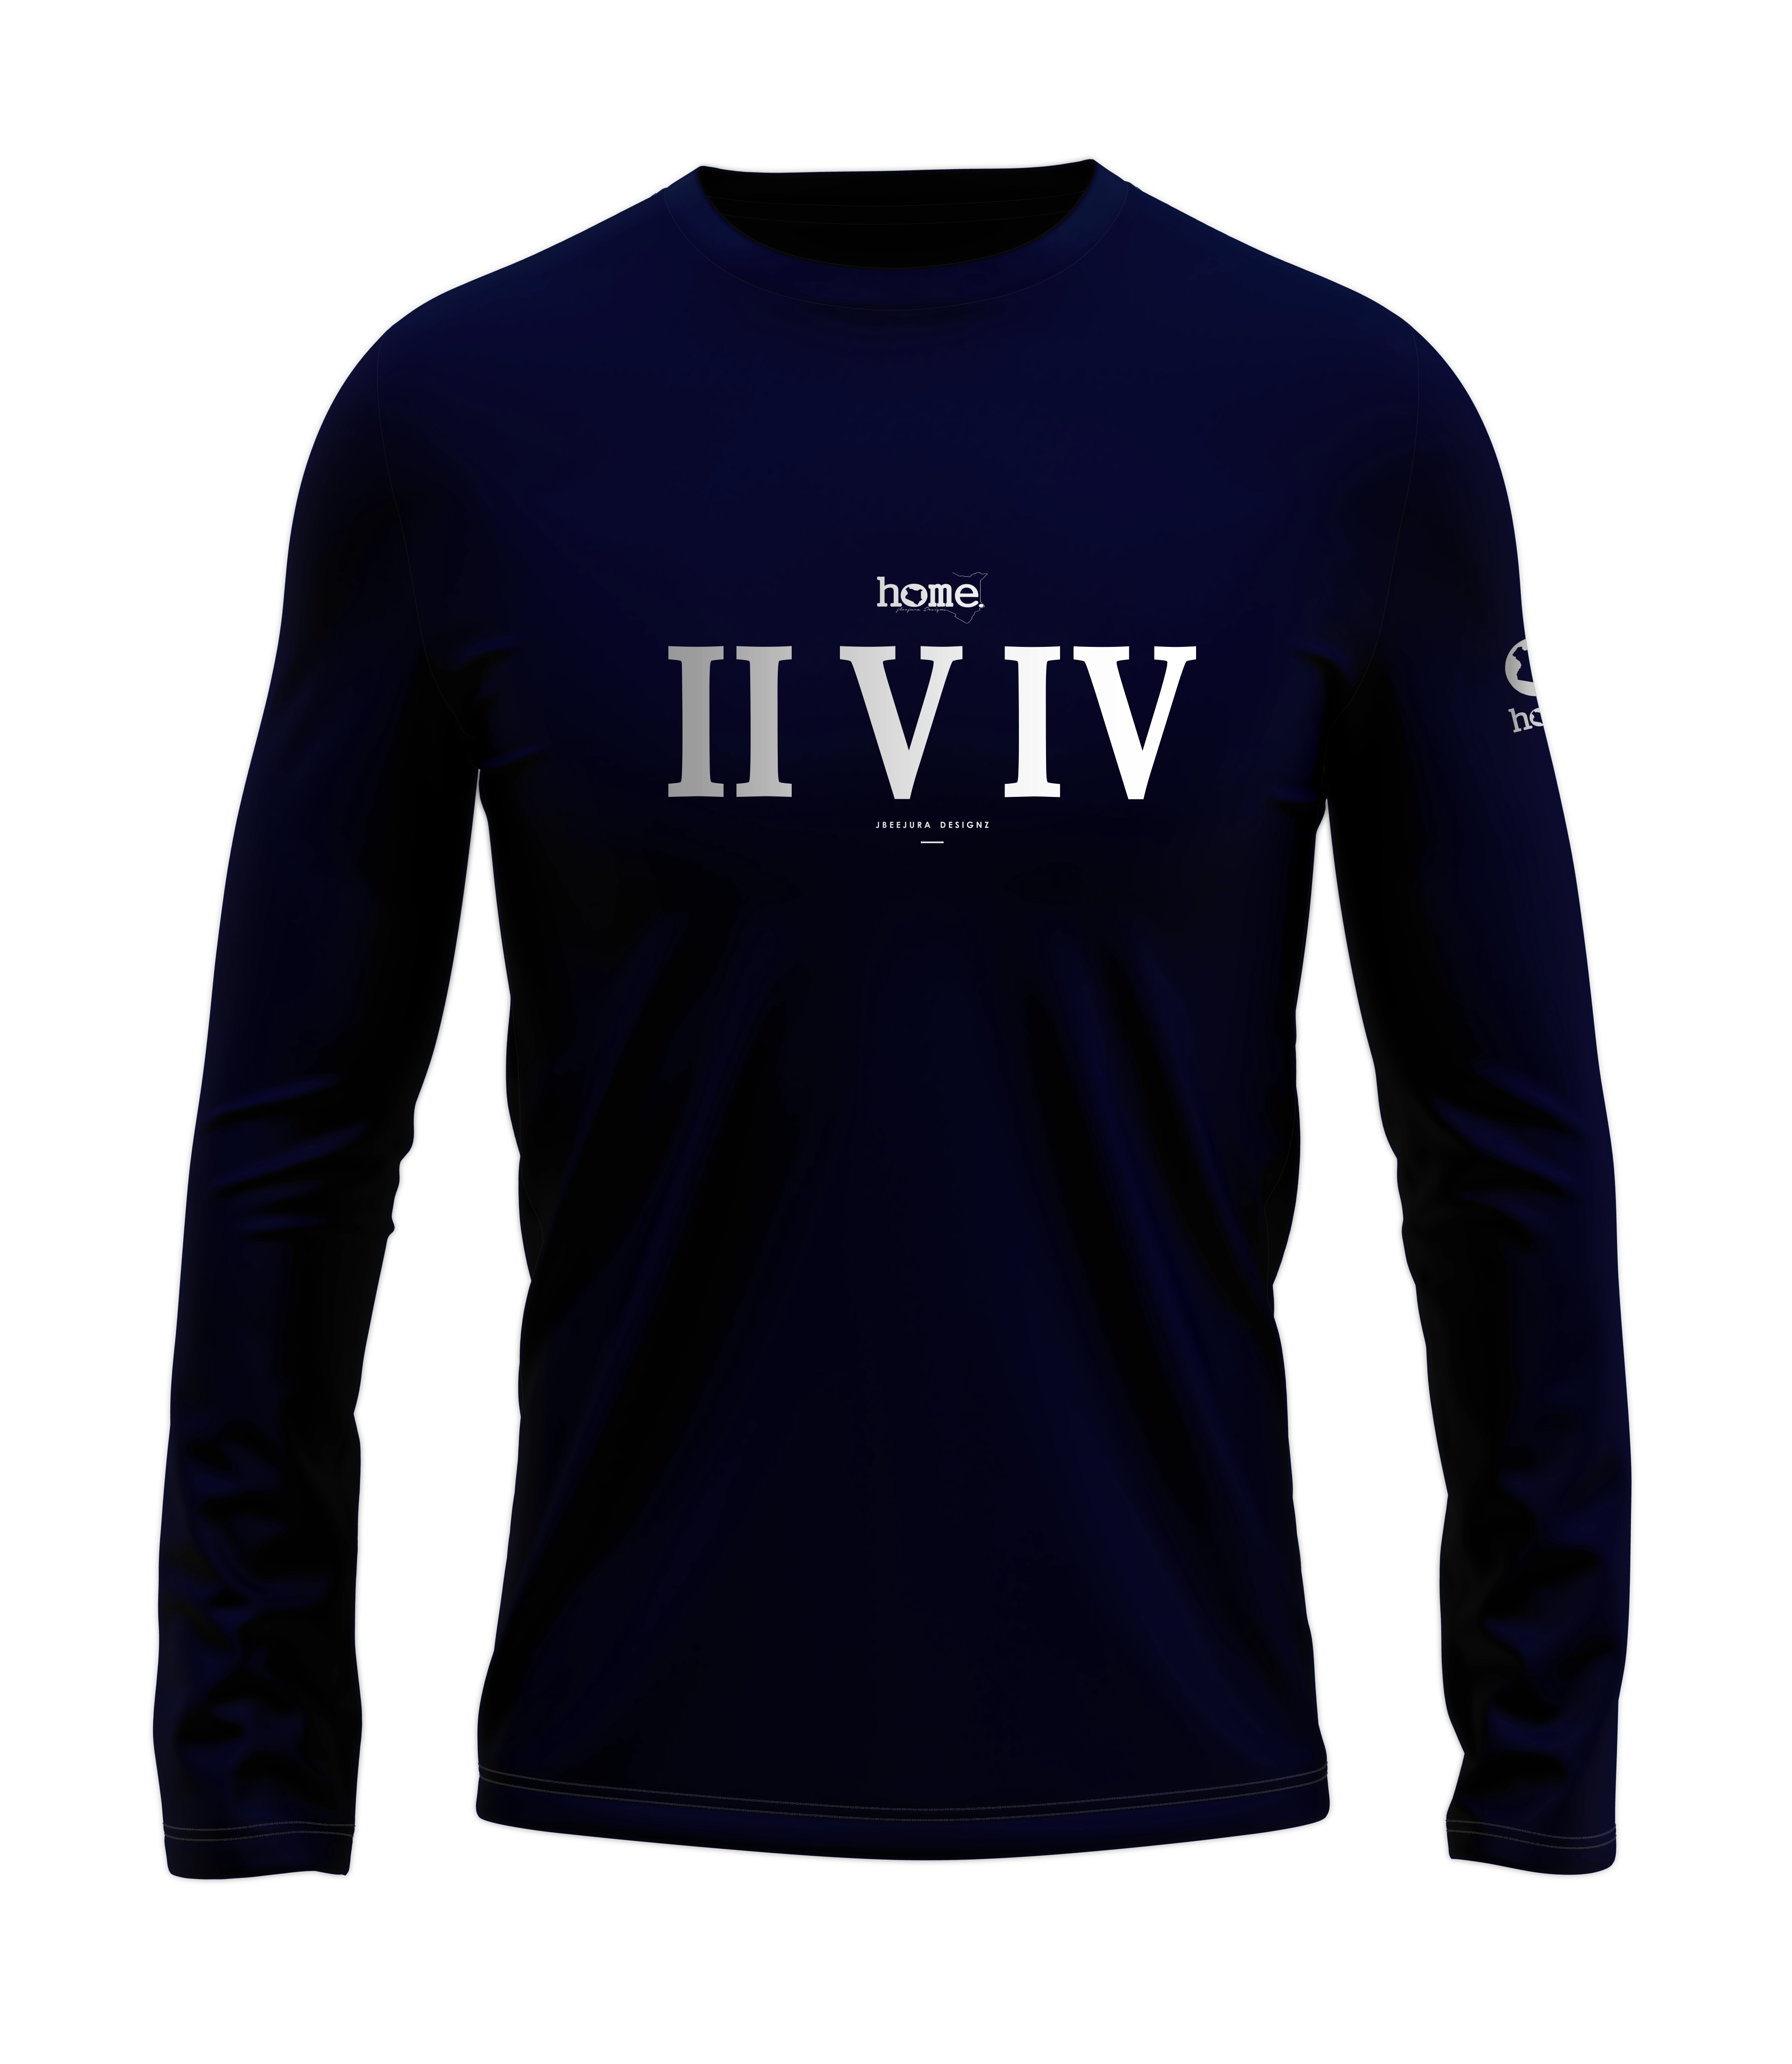 home_254 LONG-SLEEVED NAVY BLUE T-SHIRT WITH A SILVER ROMAN NUMERALS PRINT – COTTON PLUS FABRIC